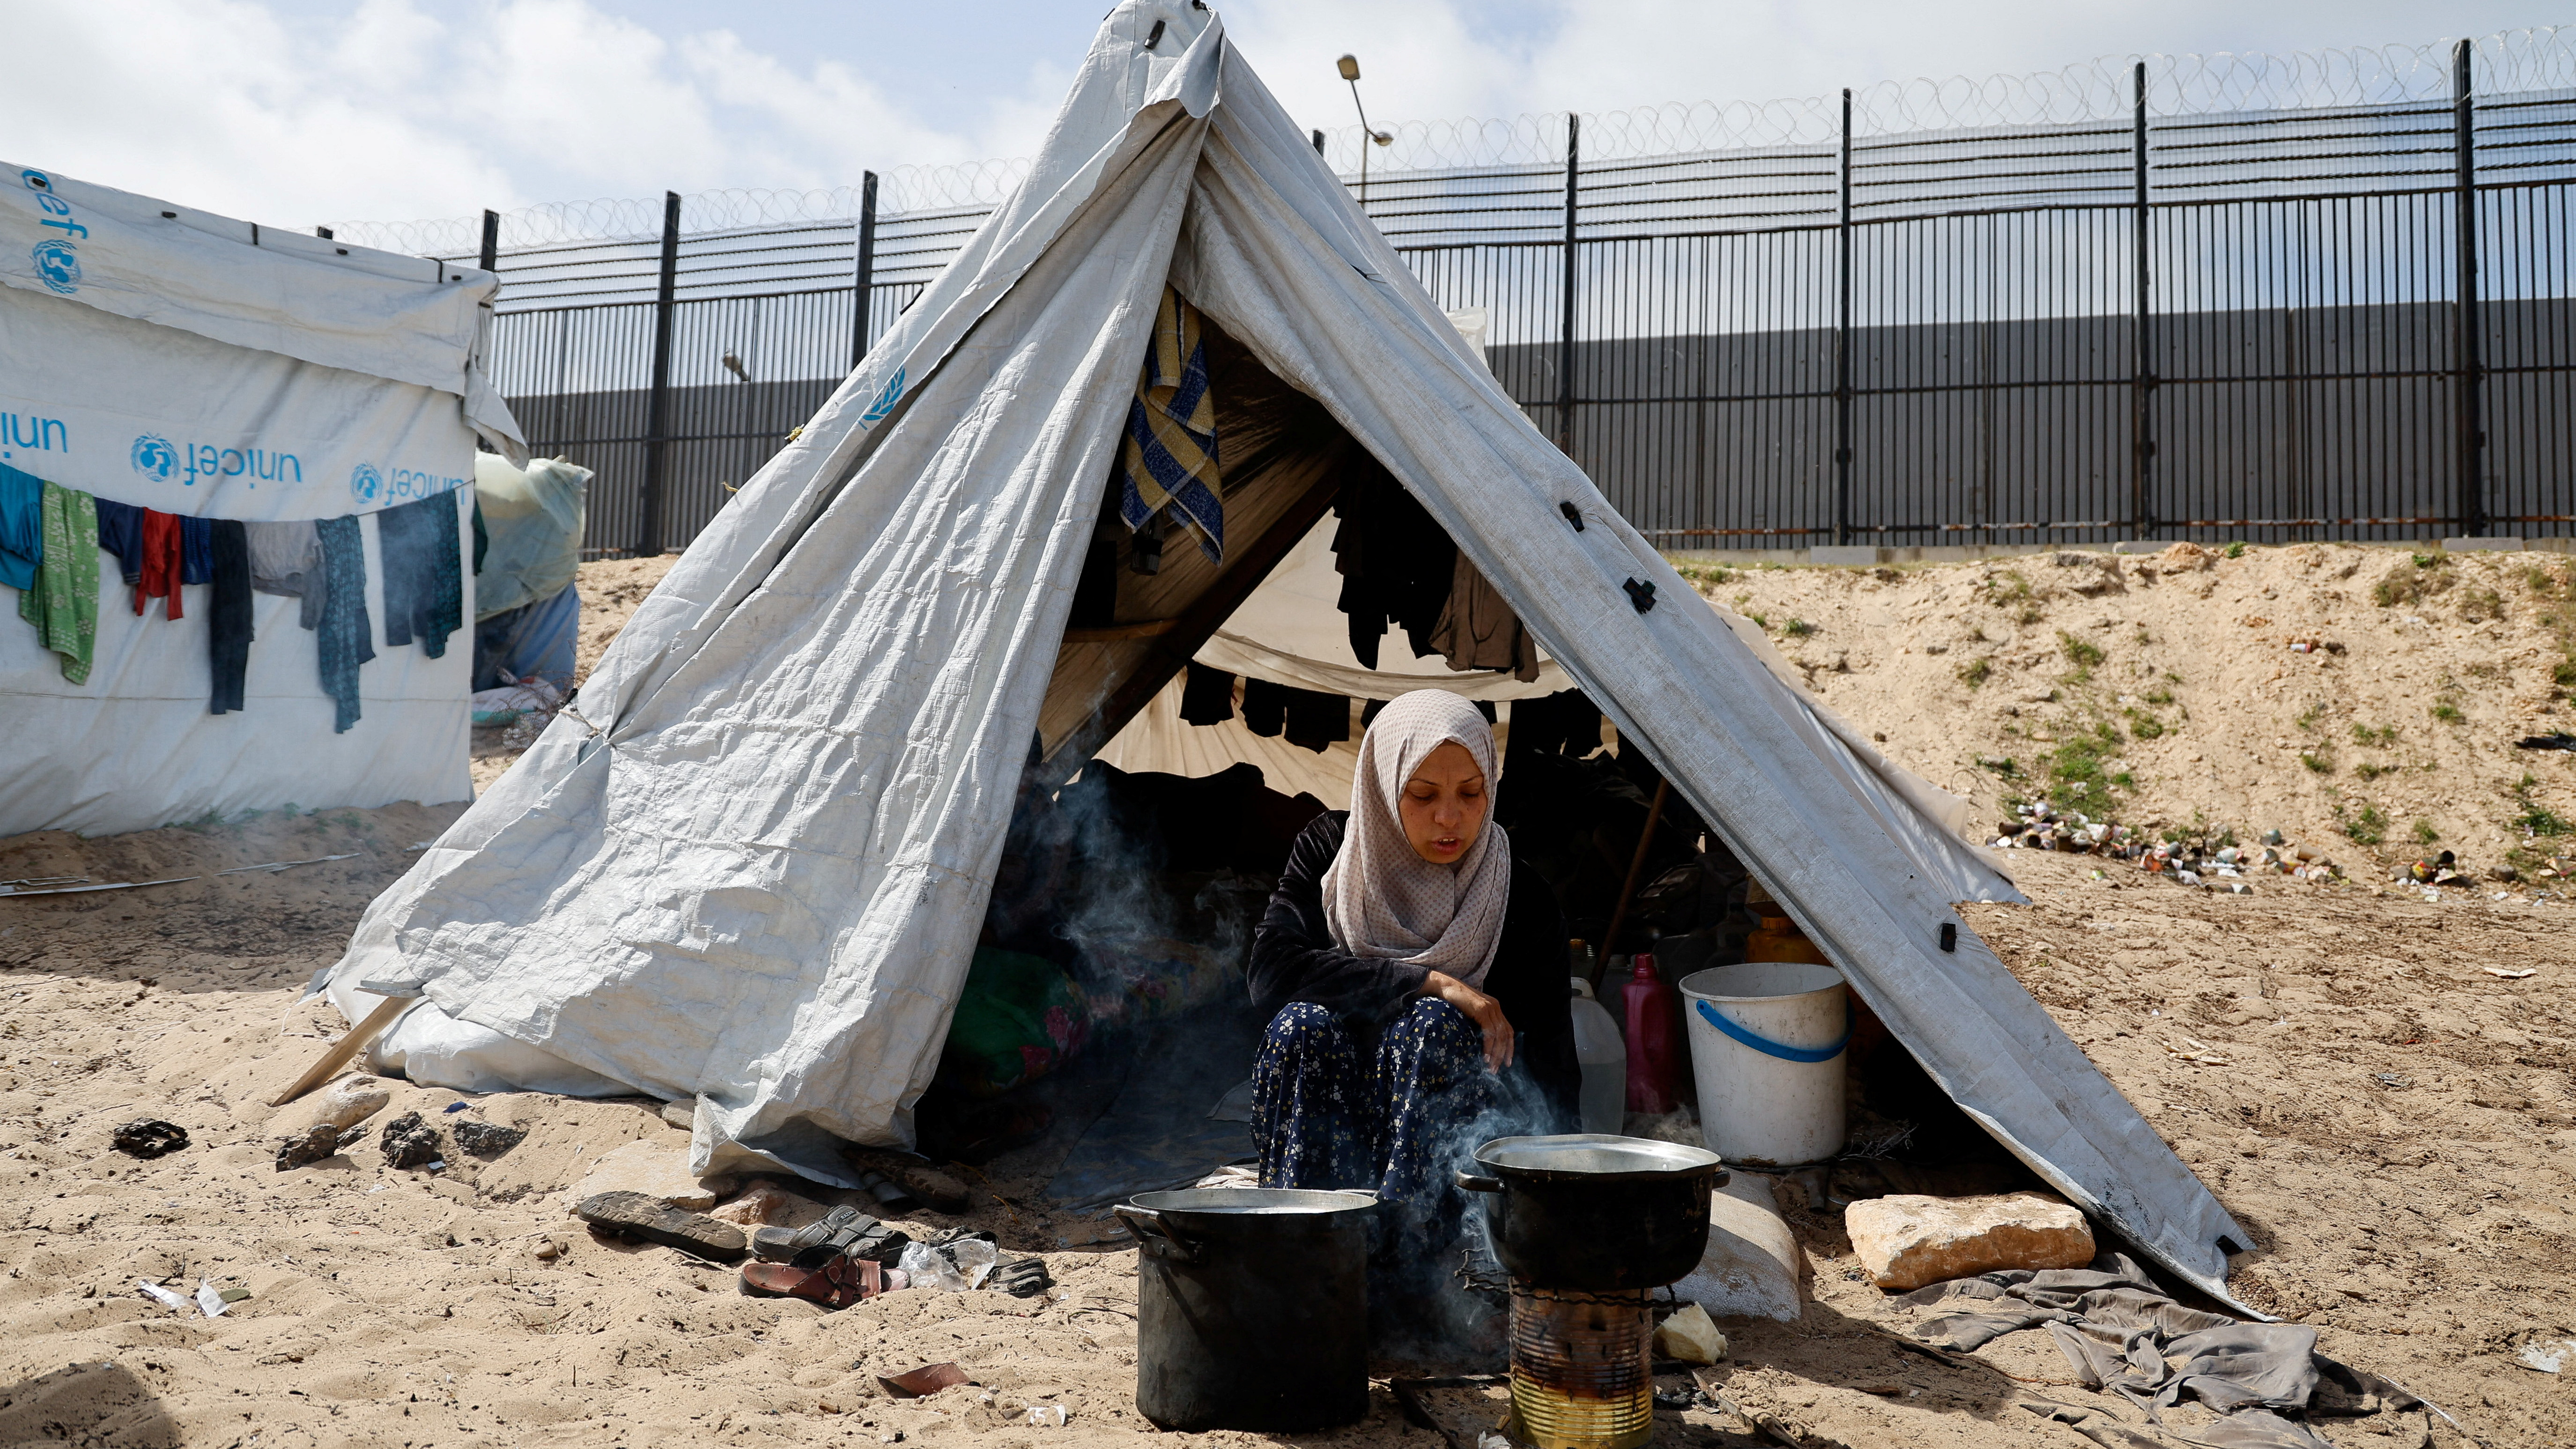 A displaced palestinian woman sits in a tent near the Rafah border /Mohammed Salem/Reuters